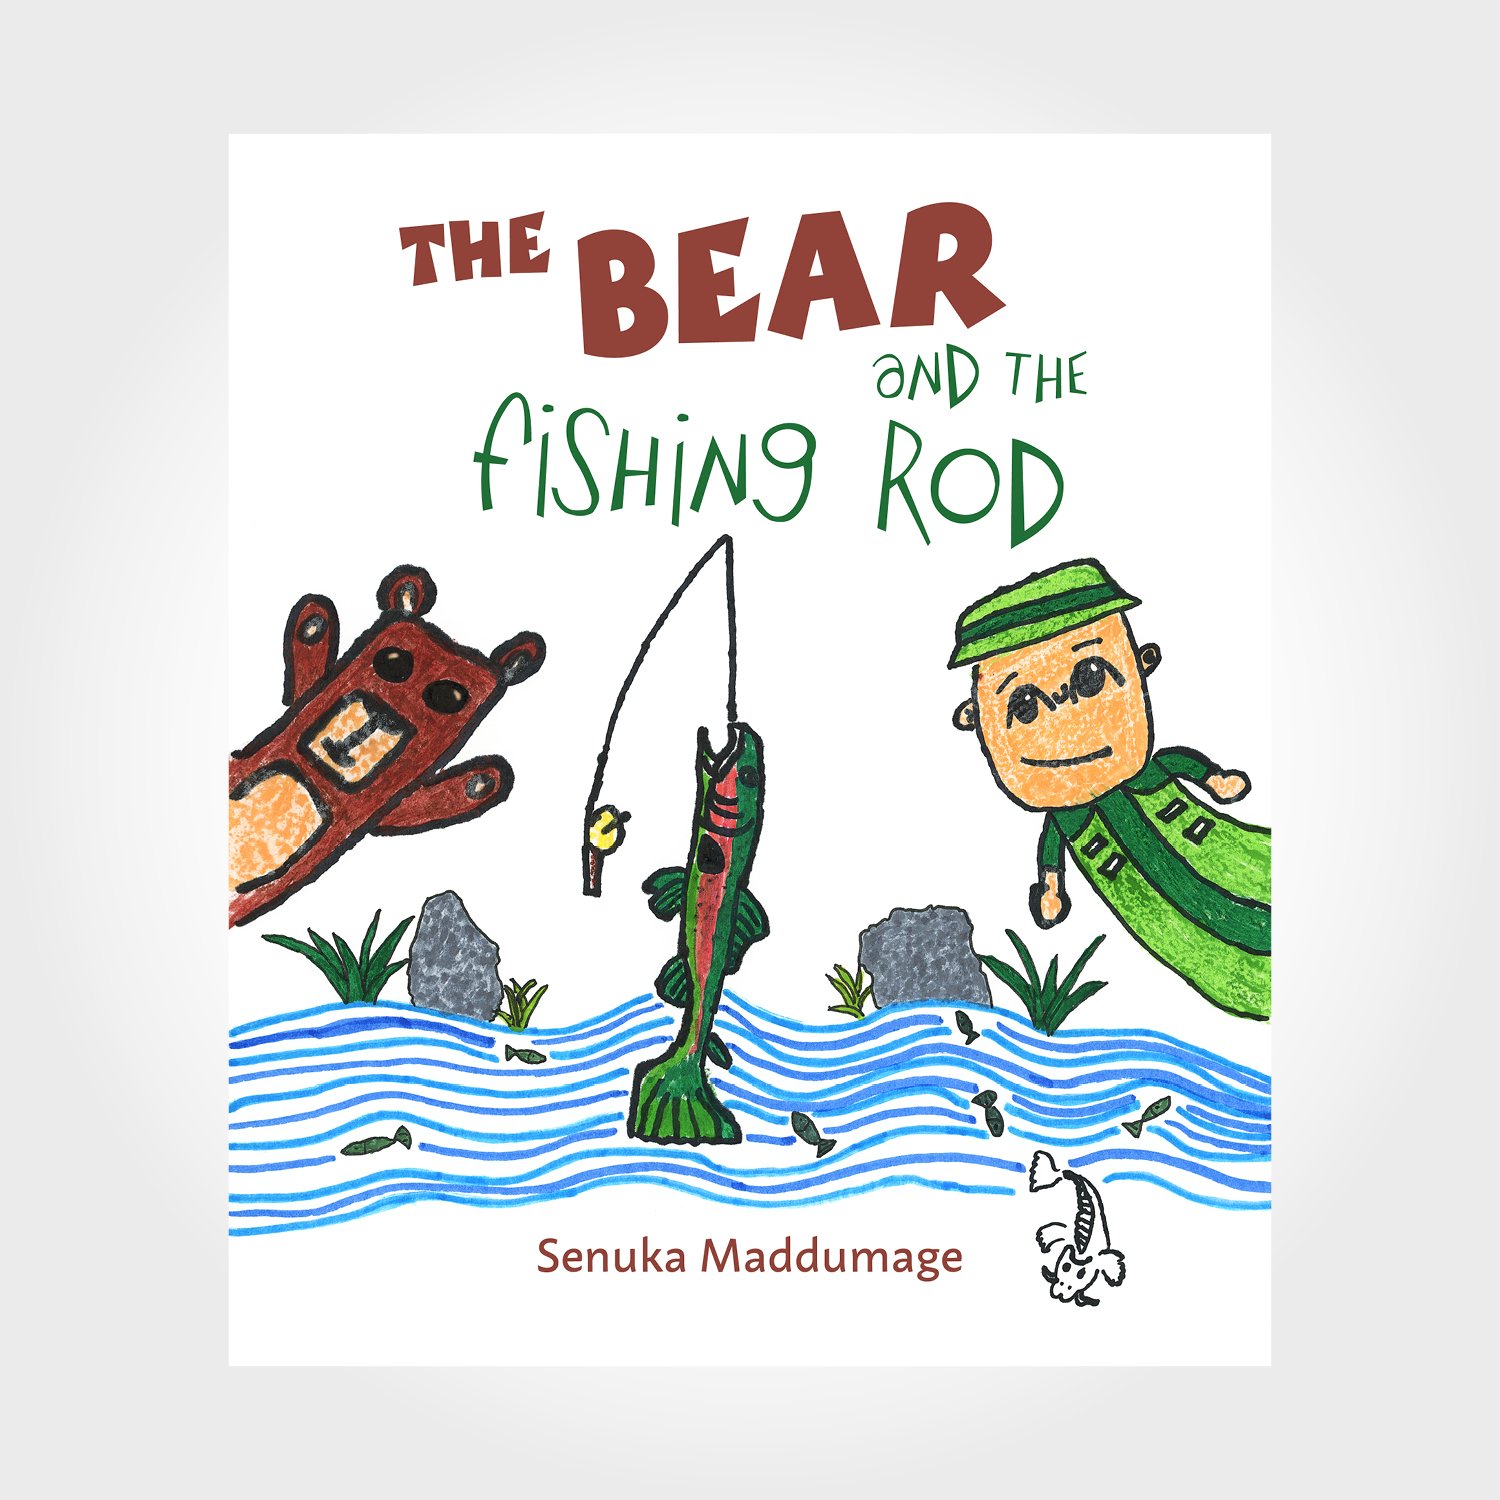 The Bear and the Fishing Rod